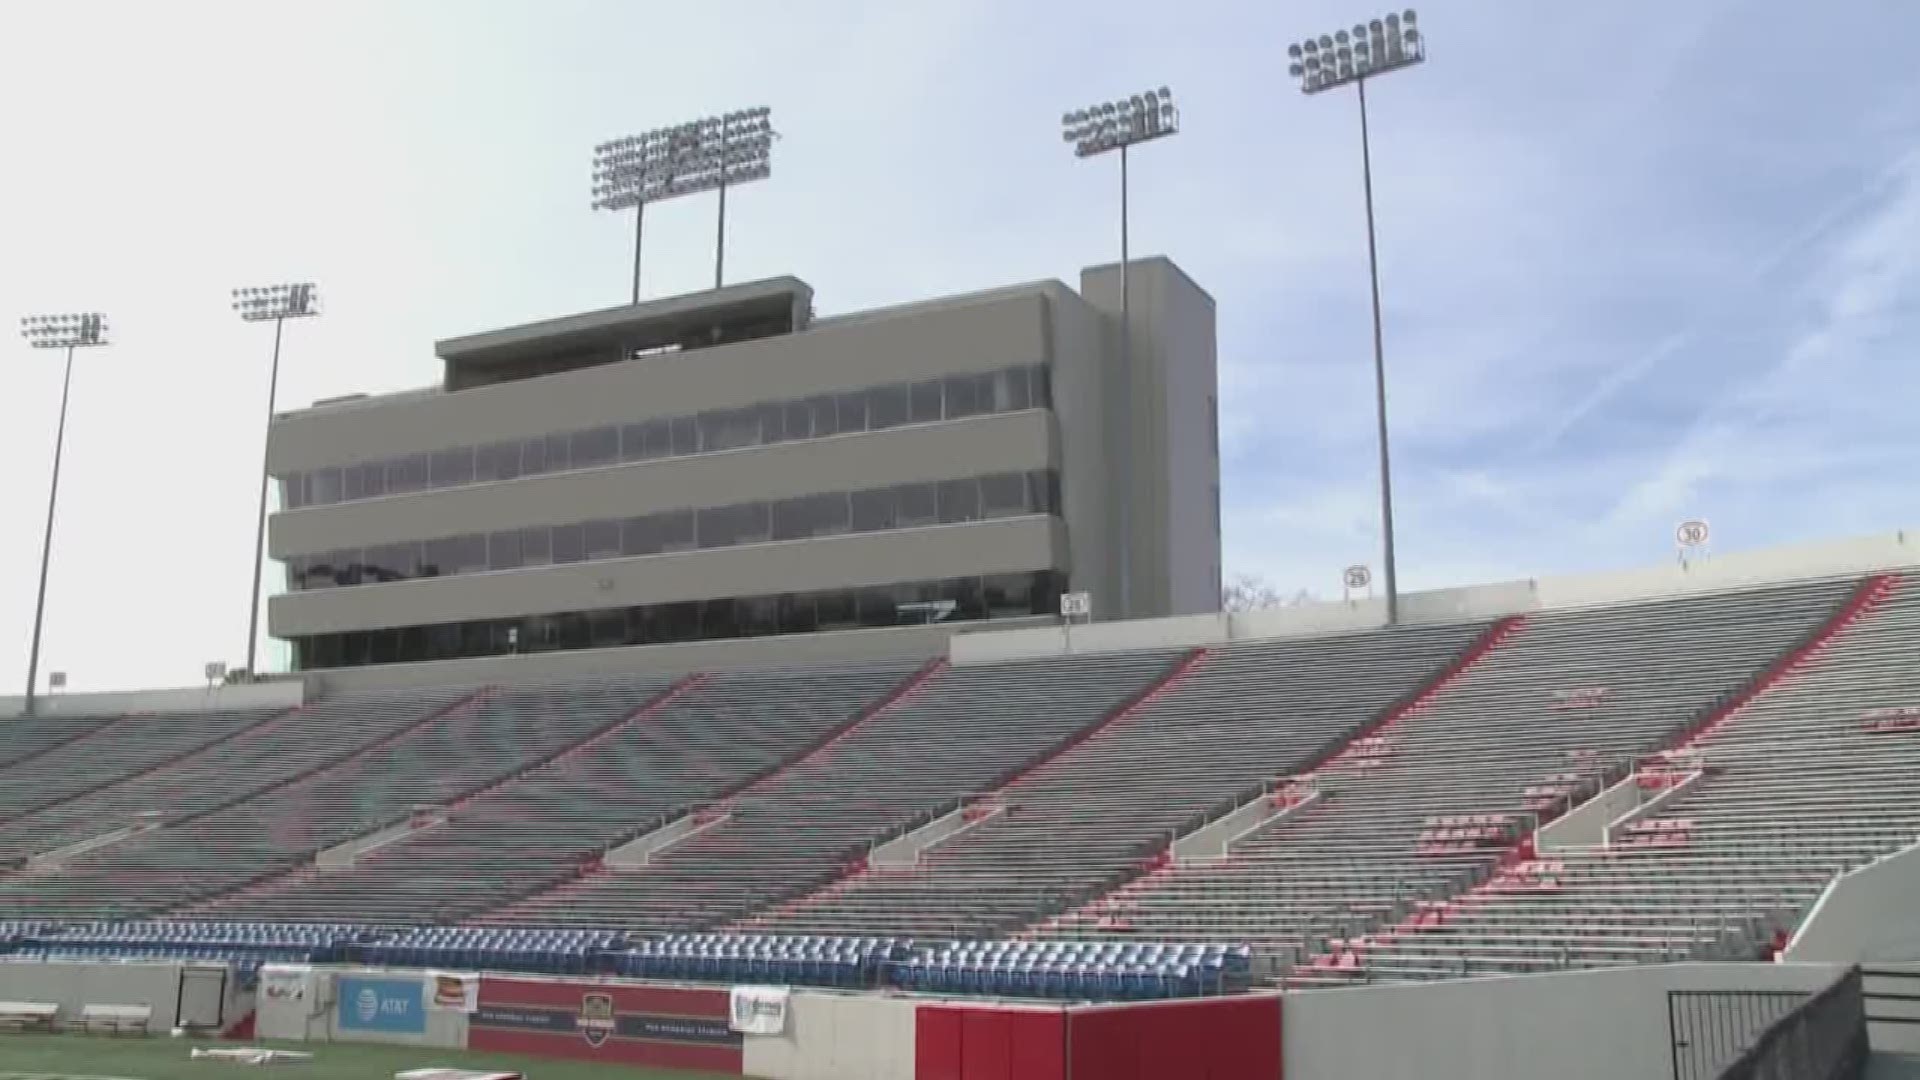 It's going to be a big football weekend at War Memorial Stadium.